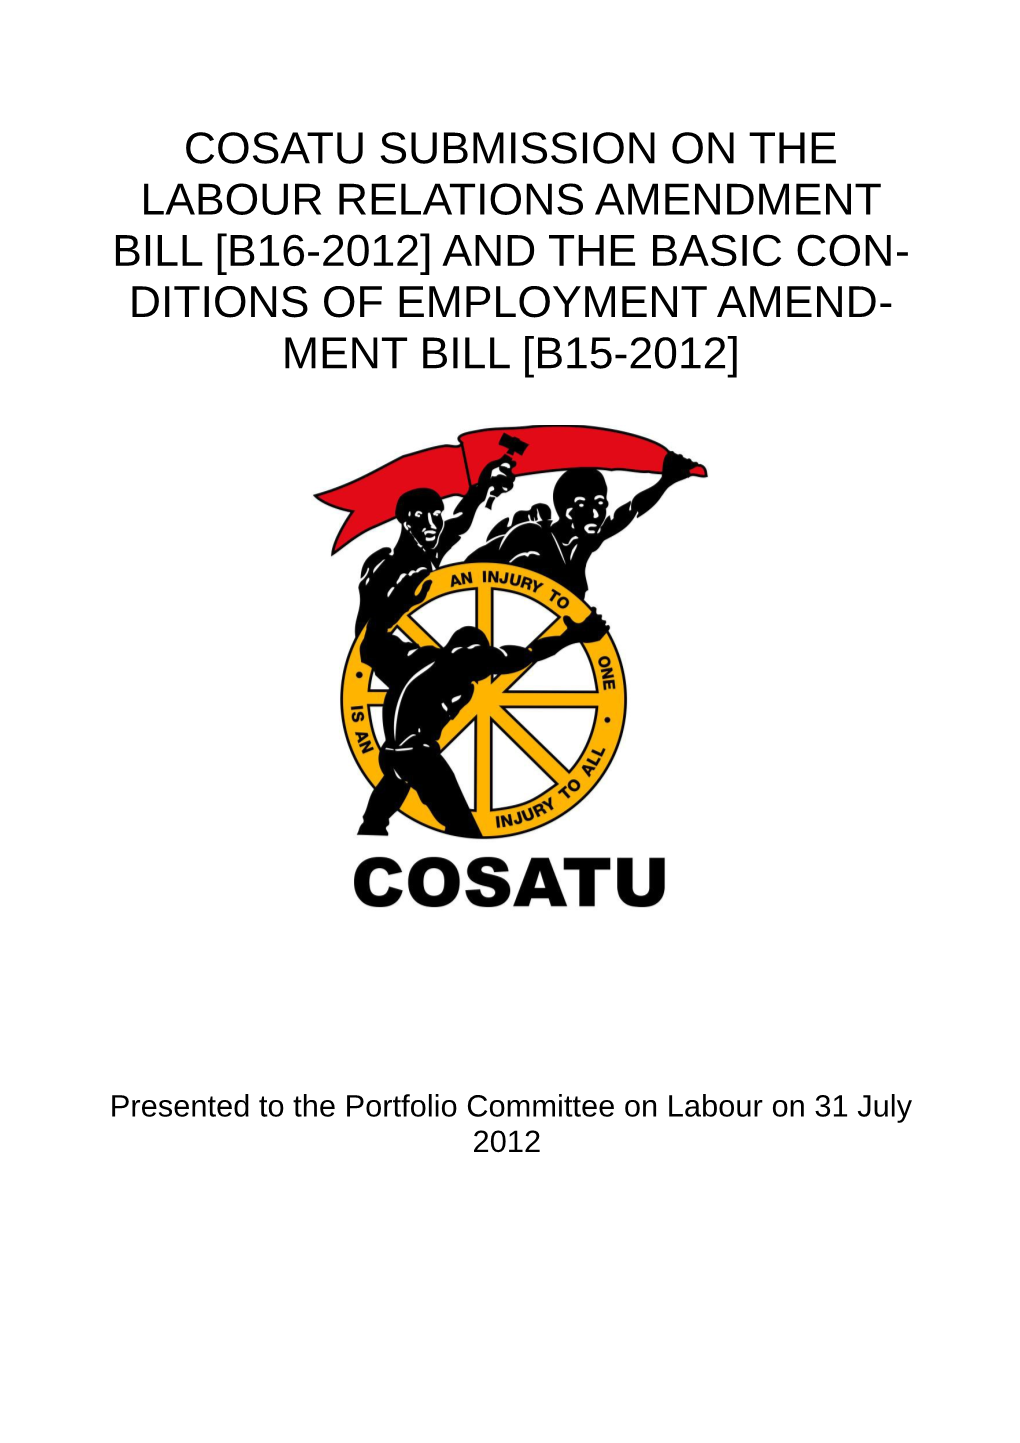 Cosatu Submission on the Labour Relations Amendment Bill B16-2012 and the Basic Conditions